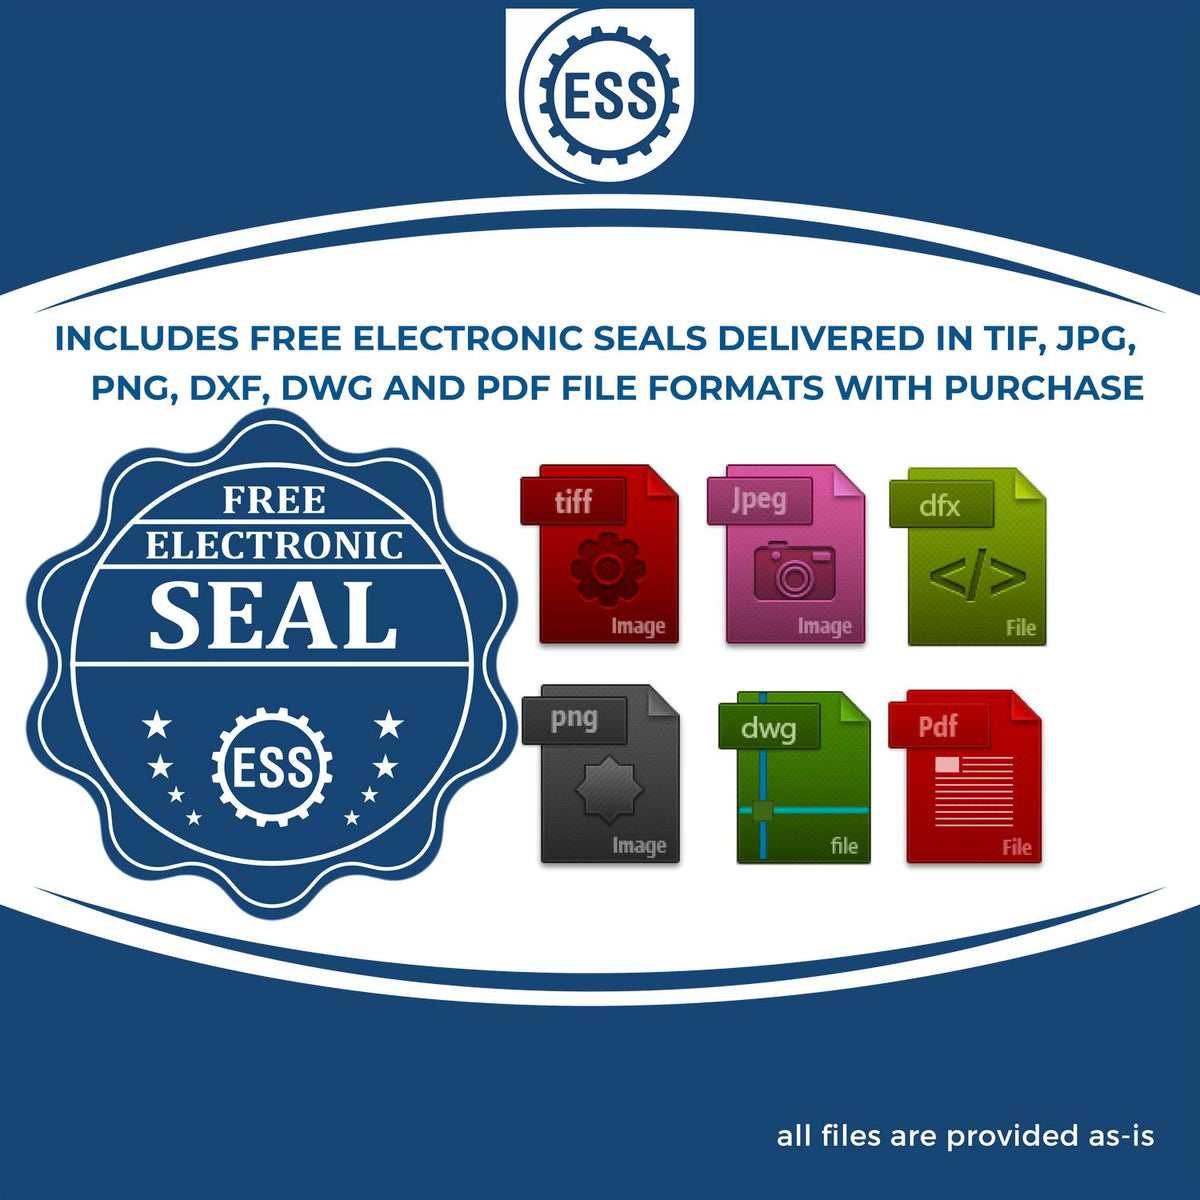 An infographic for the free electronic seal for the Self-Inking Maine Landscape Architect Stamp illustrating the different file type icons such as DXF, DWG, TIF, JPG and PNG.